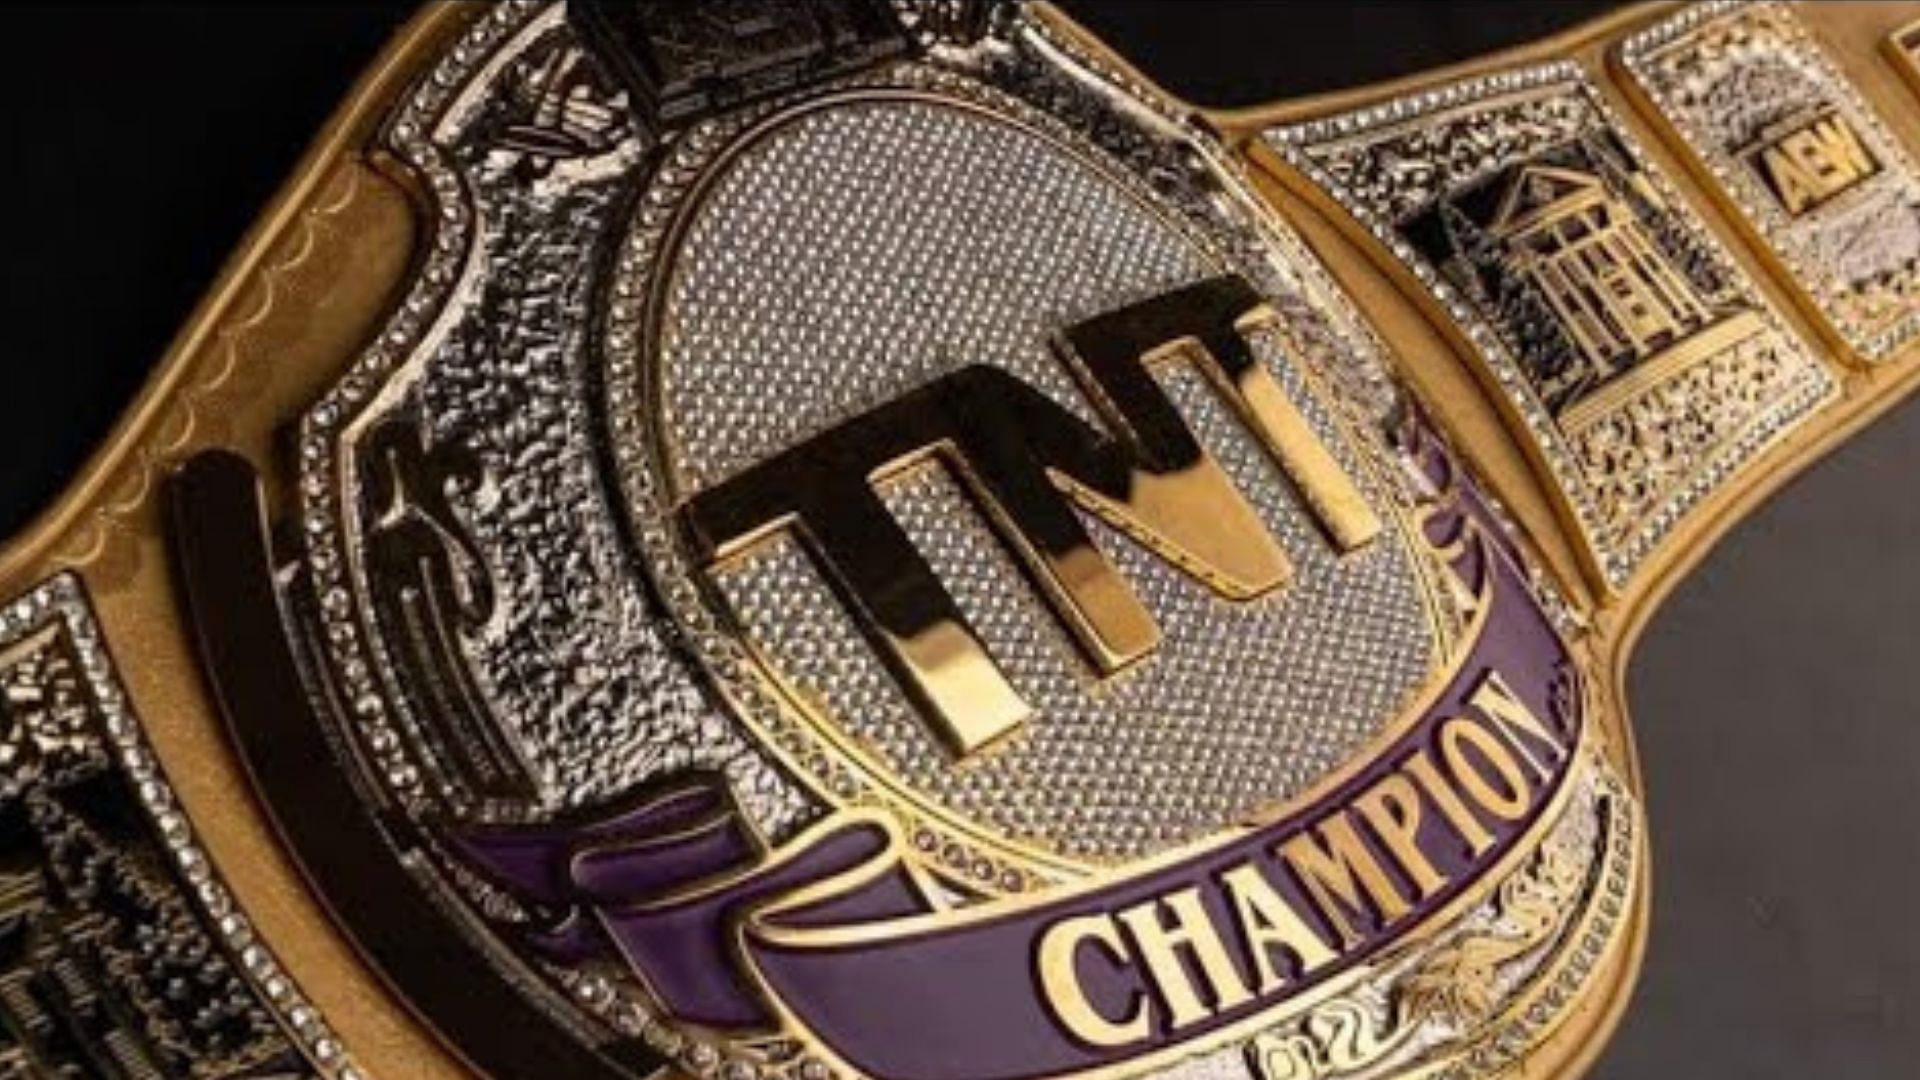 TNT Championship is one of the top title in AEW